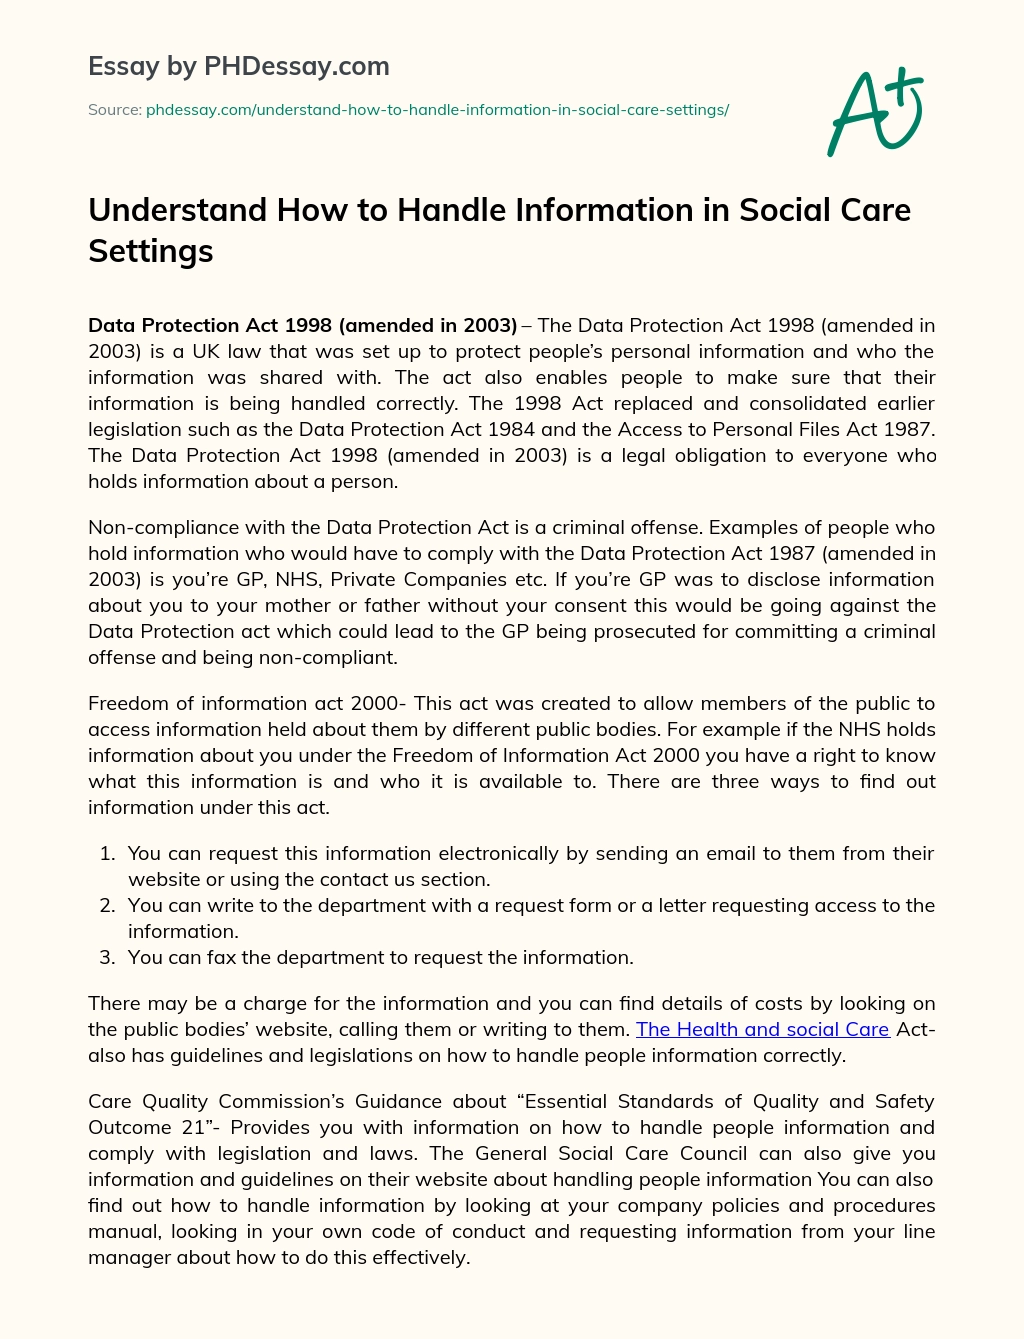 Understand How to Handle Information in Social Care Settings essay